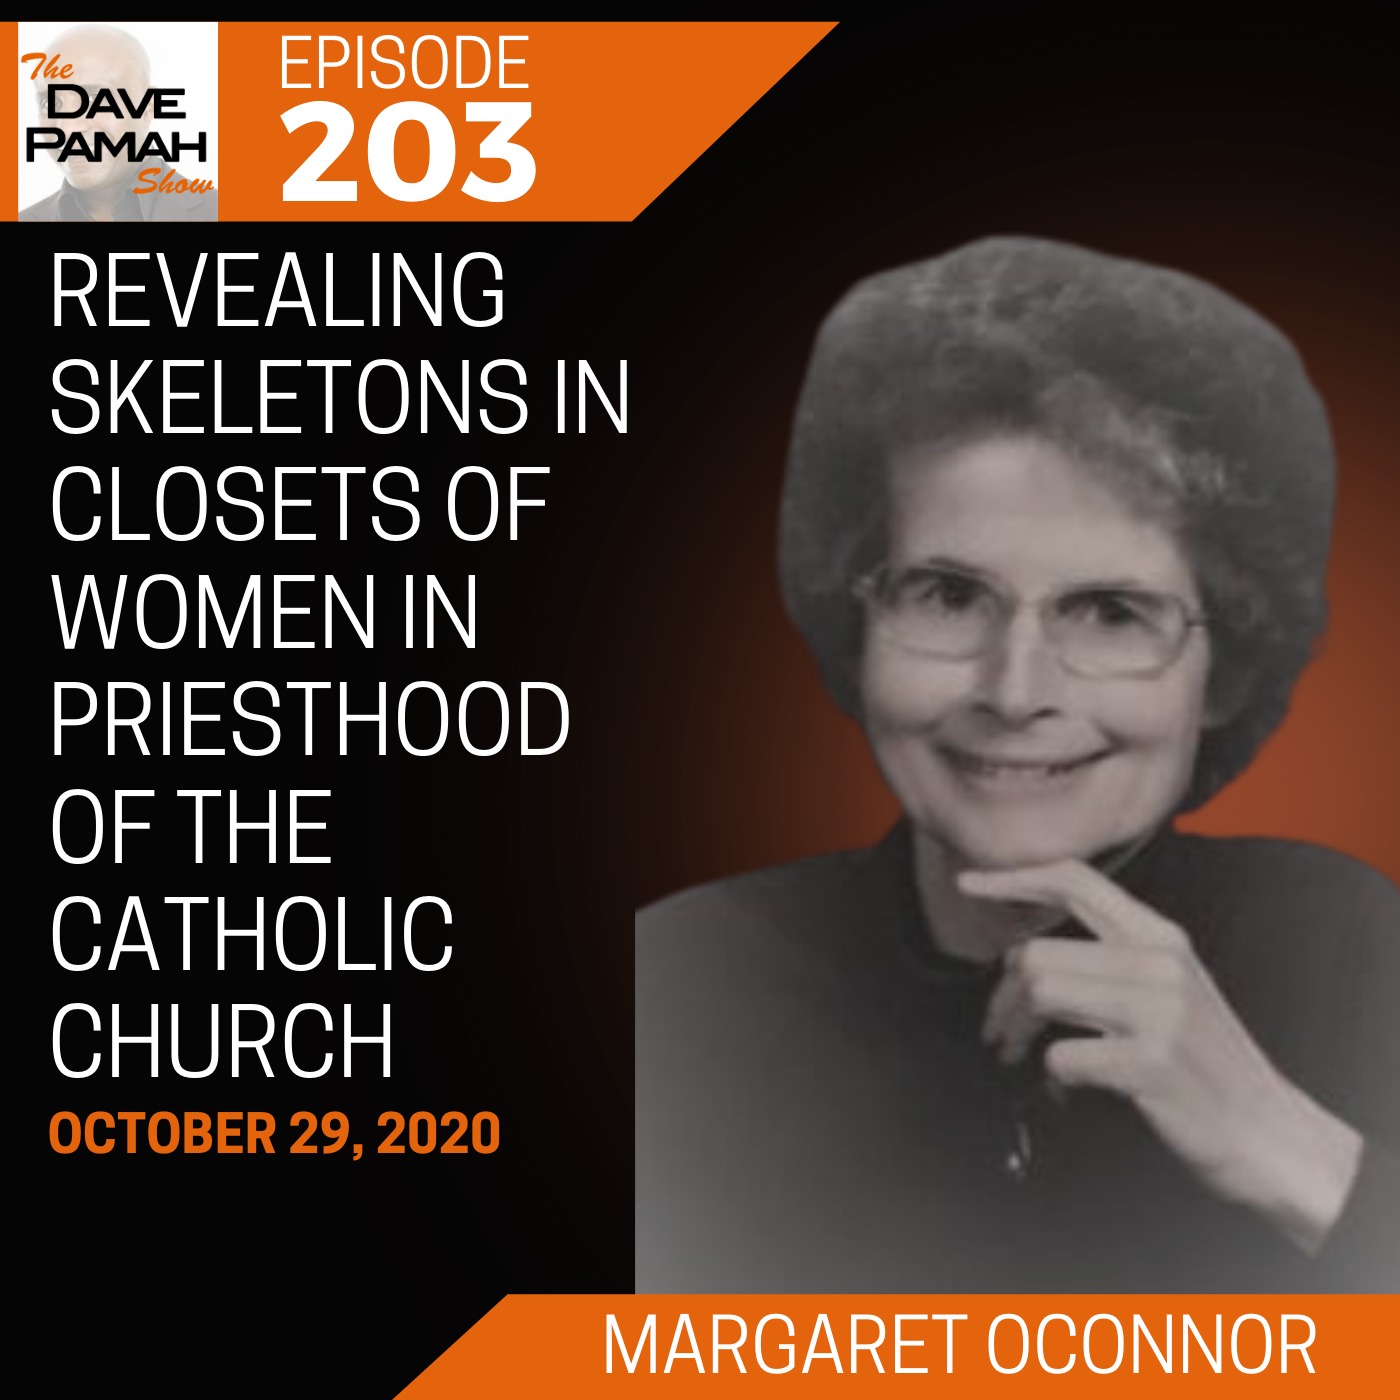 Revealing Skeletons in Closets of Women in Priesthood of the Catholic Church with Margaret Oconnor